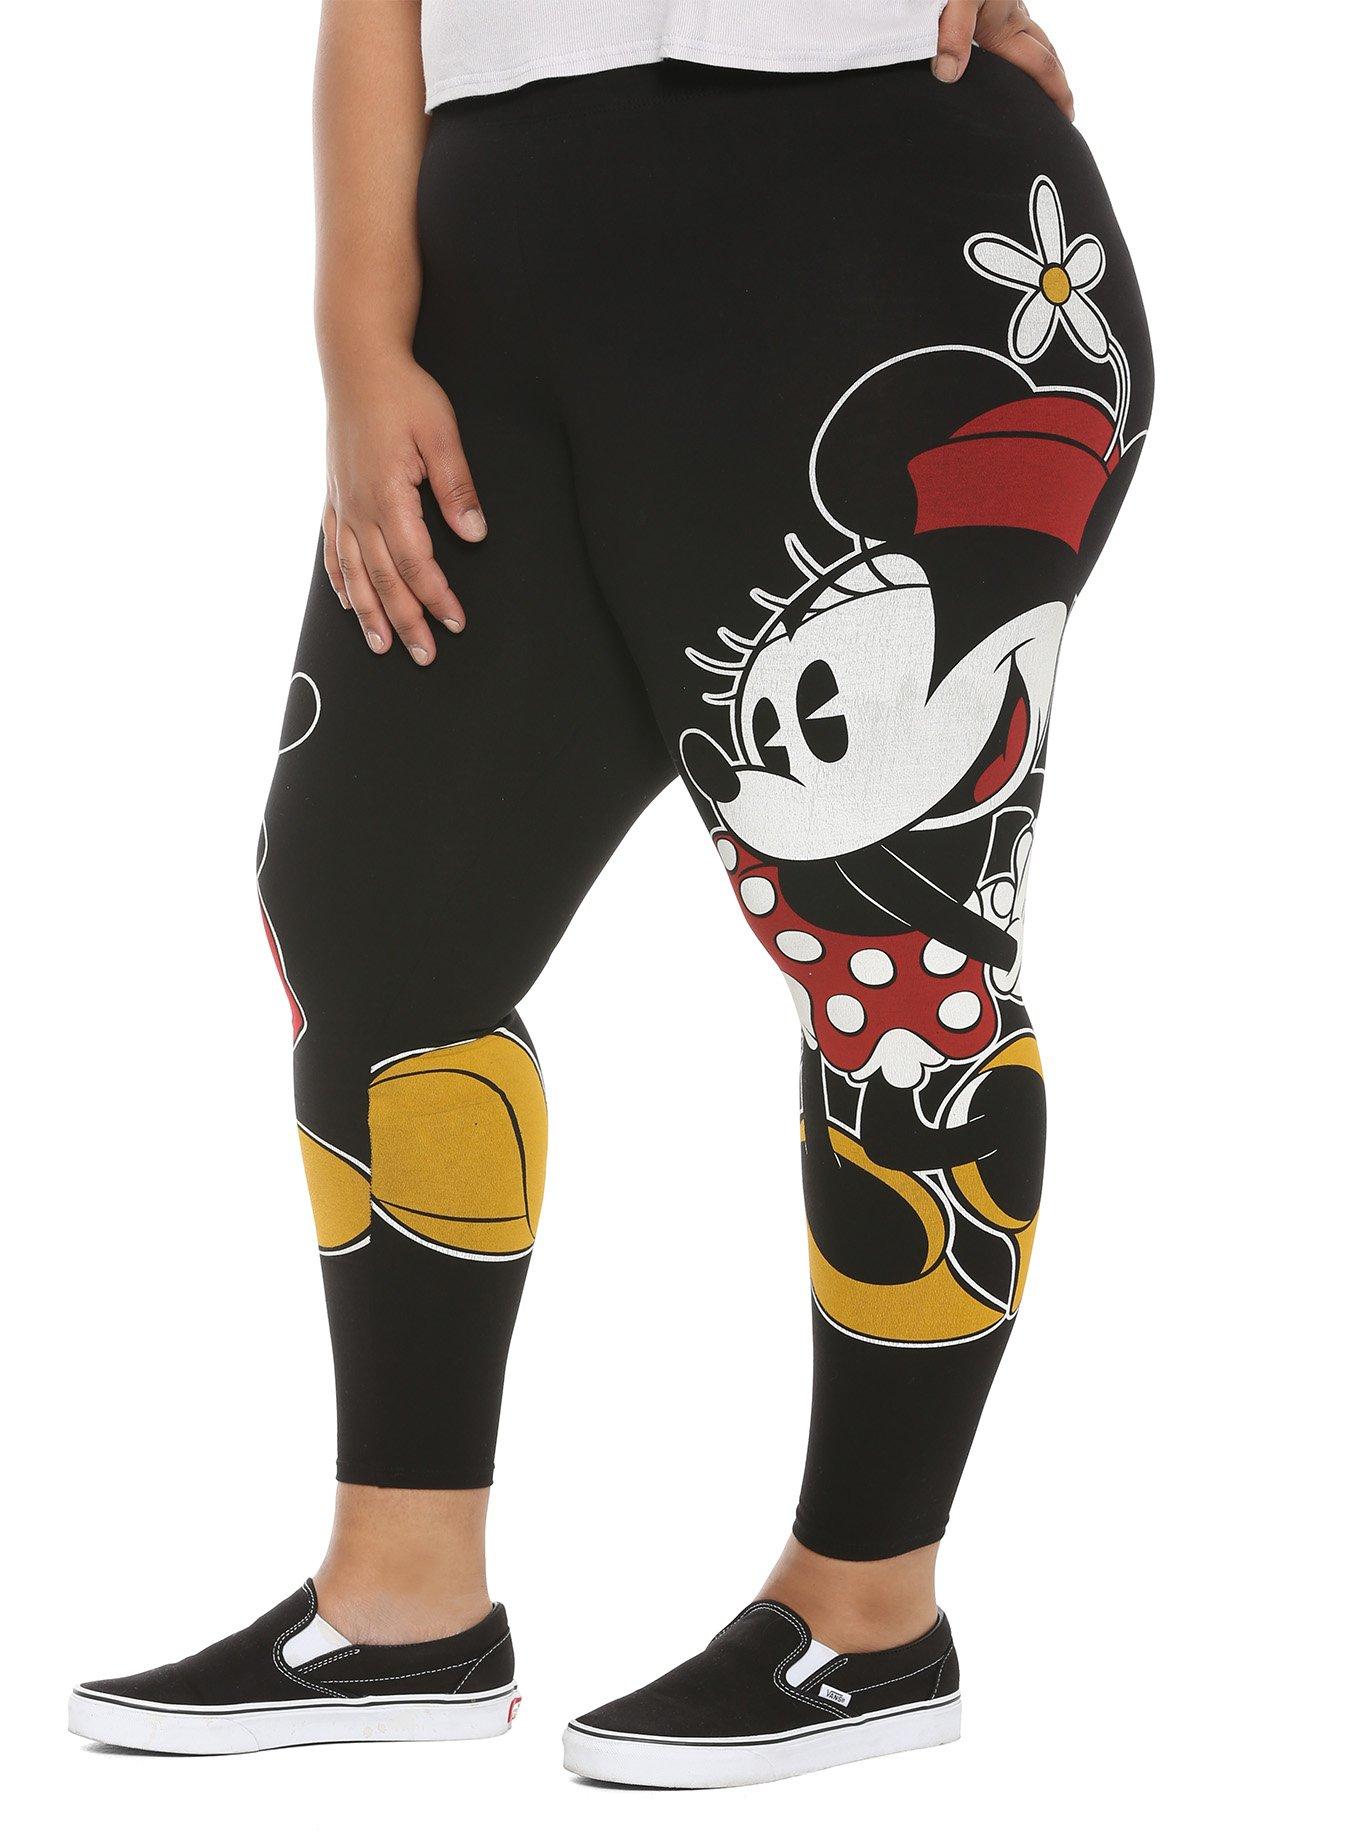 Disney Parks Mickey and Minnie Holiday Leggings Adult Size L NWT